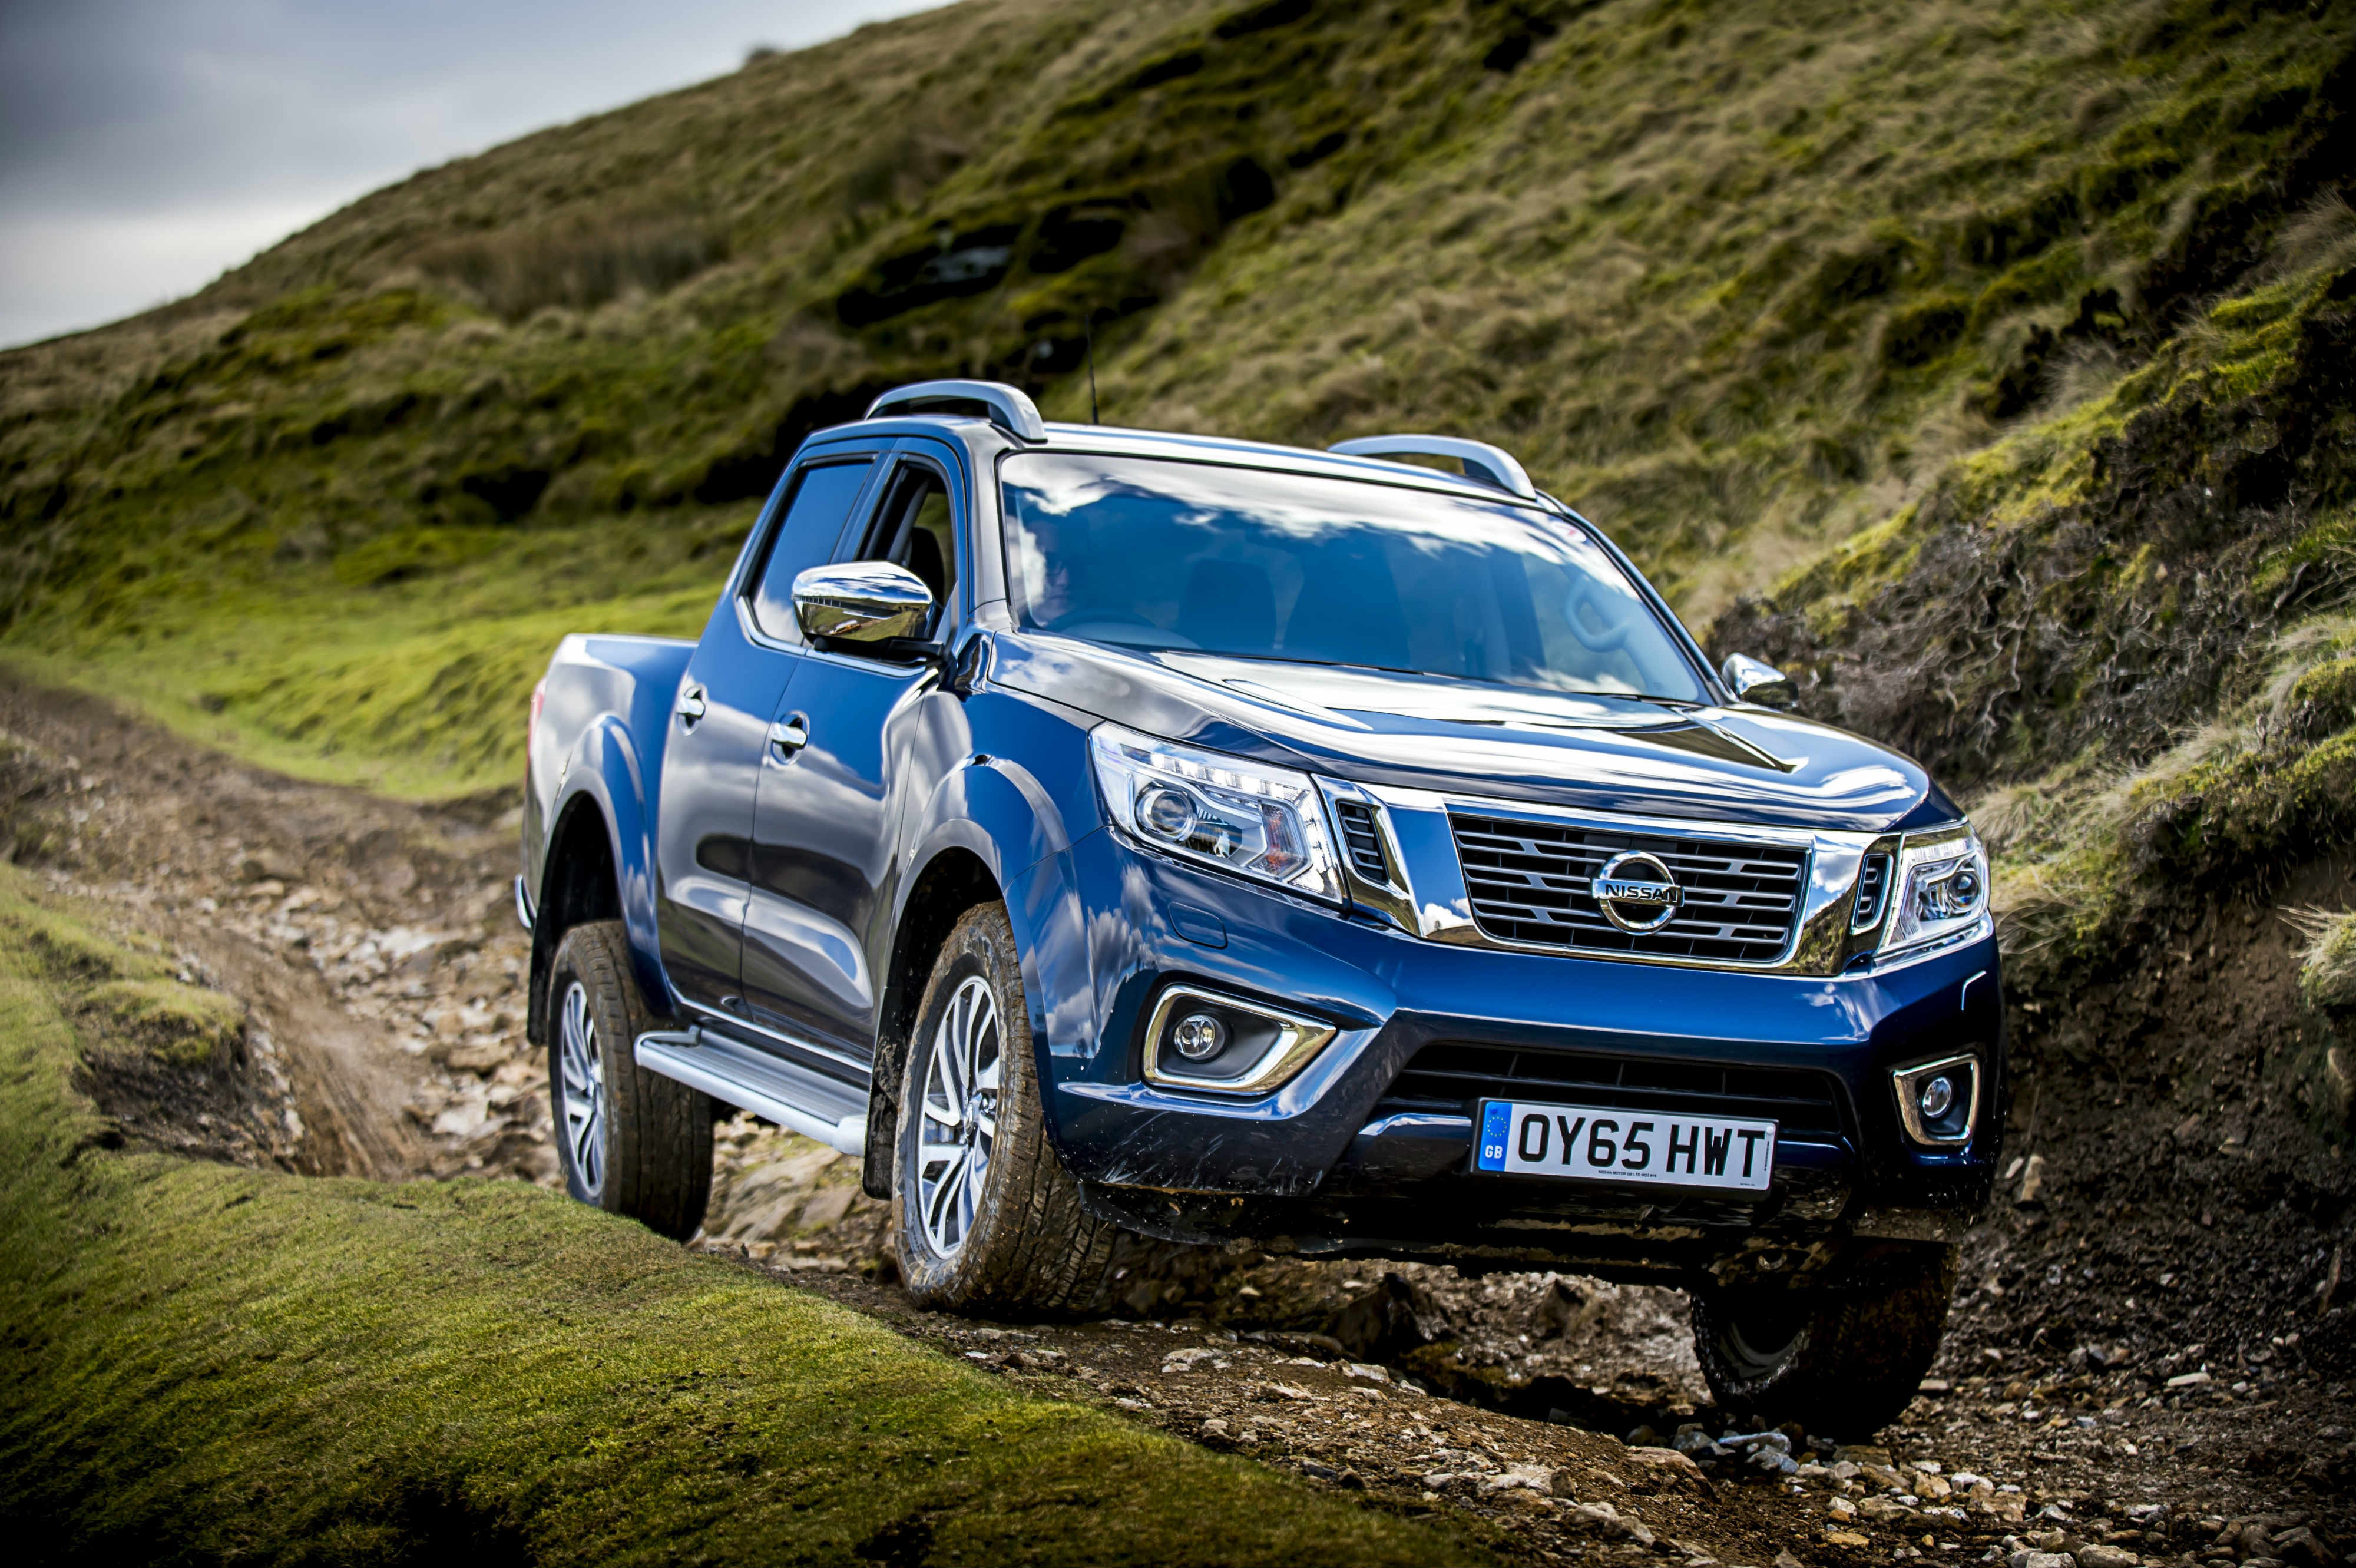 Pick up trucks: which are the best for towing, fuel economy and families? Includes Isuzu D-Max, Ford Ranger and Nissan Navara